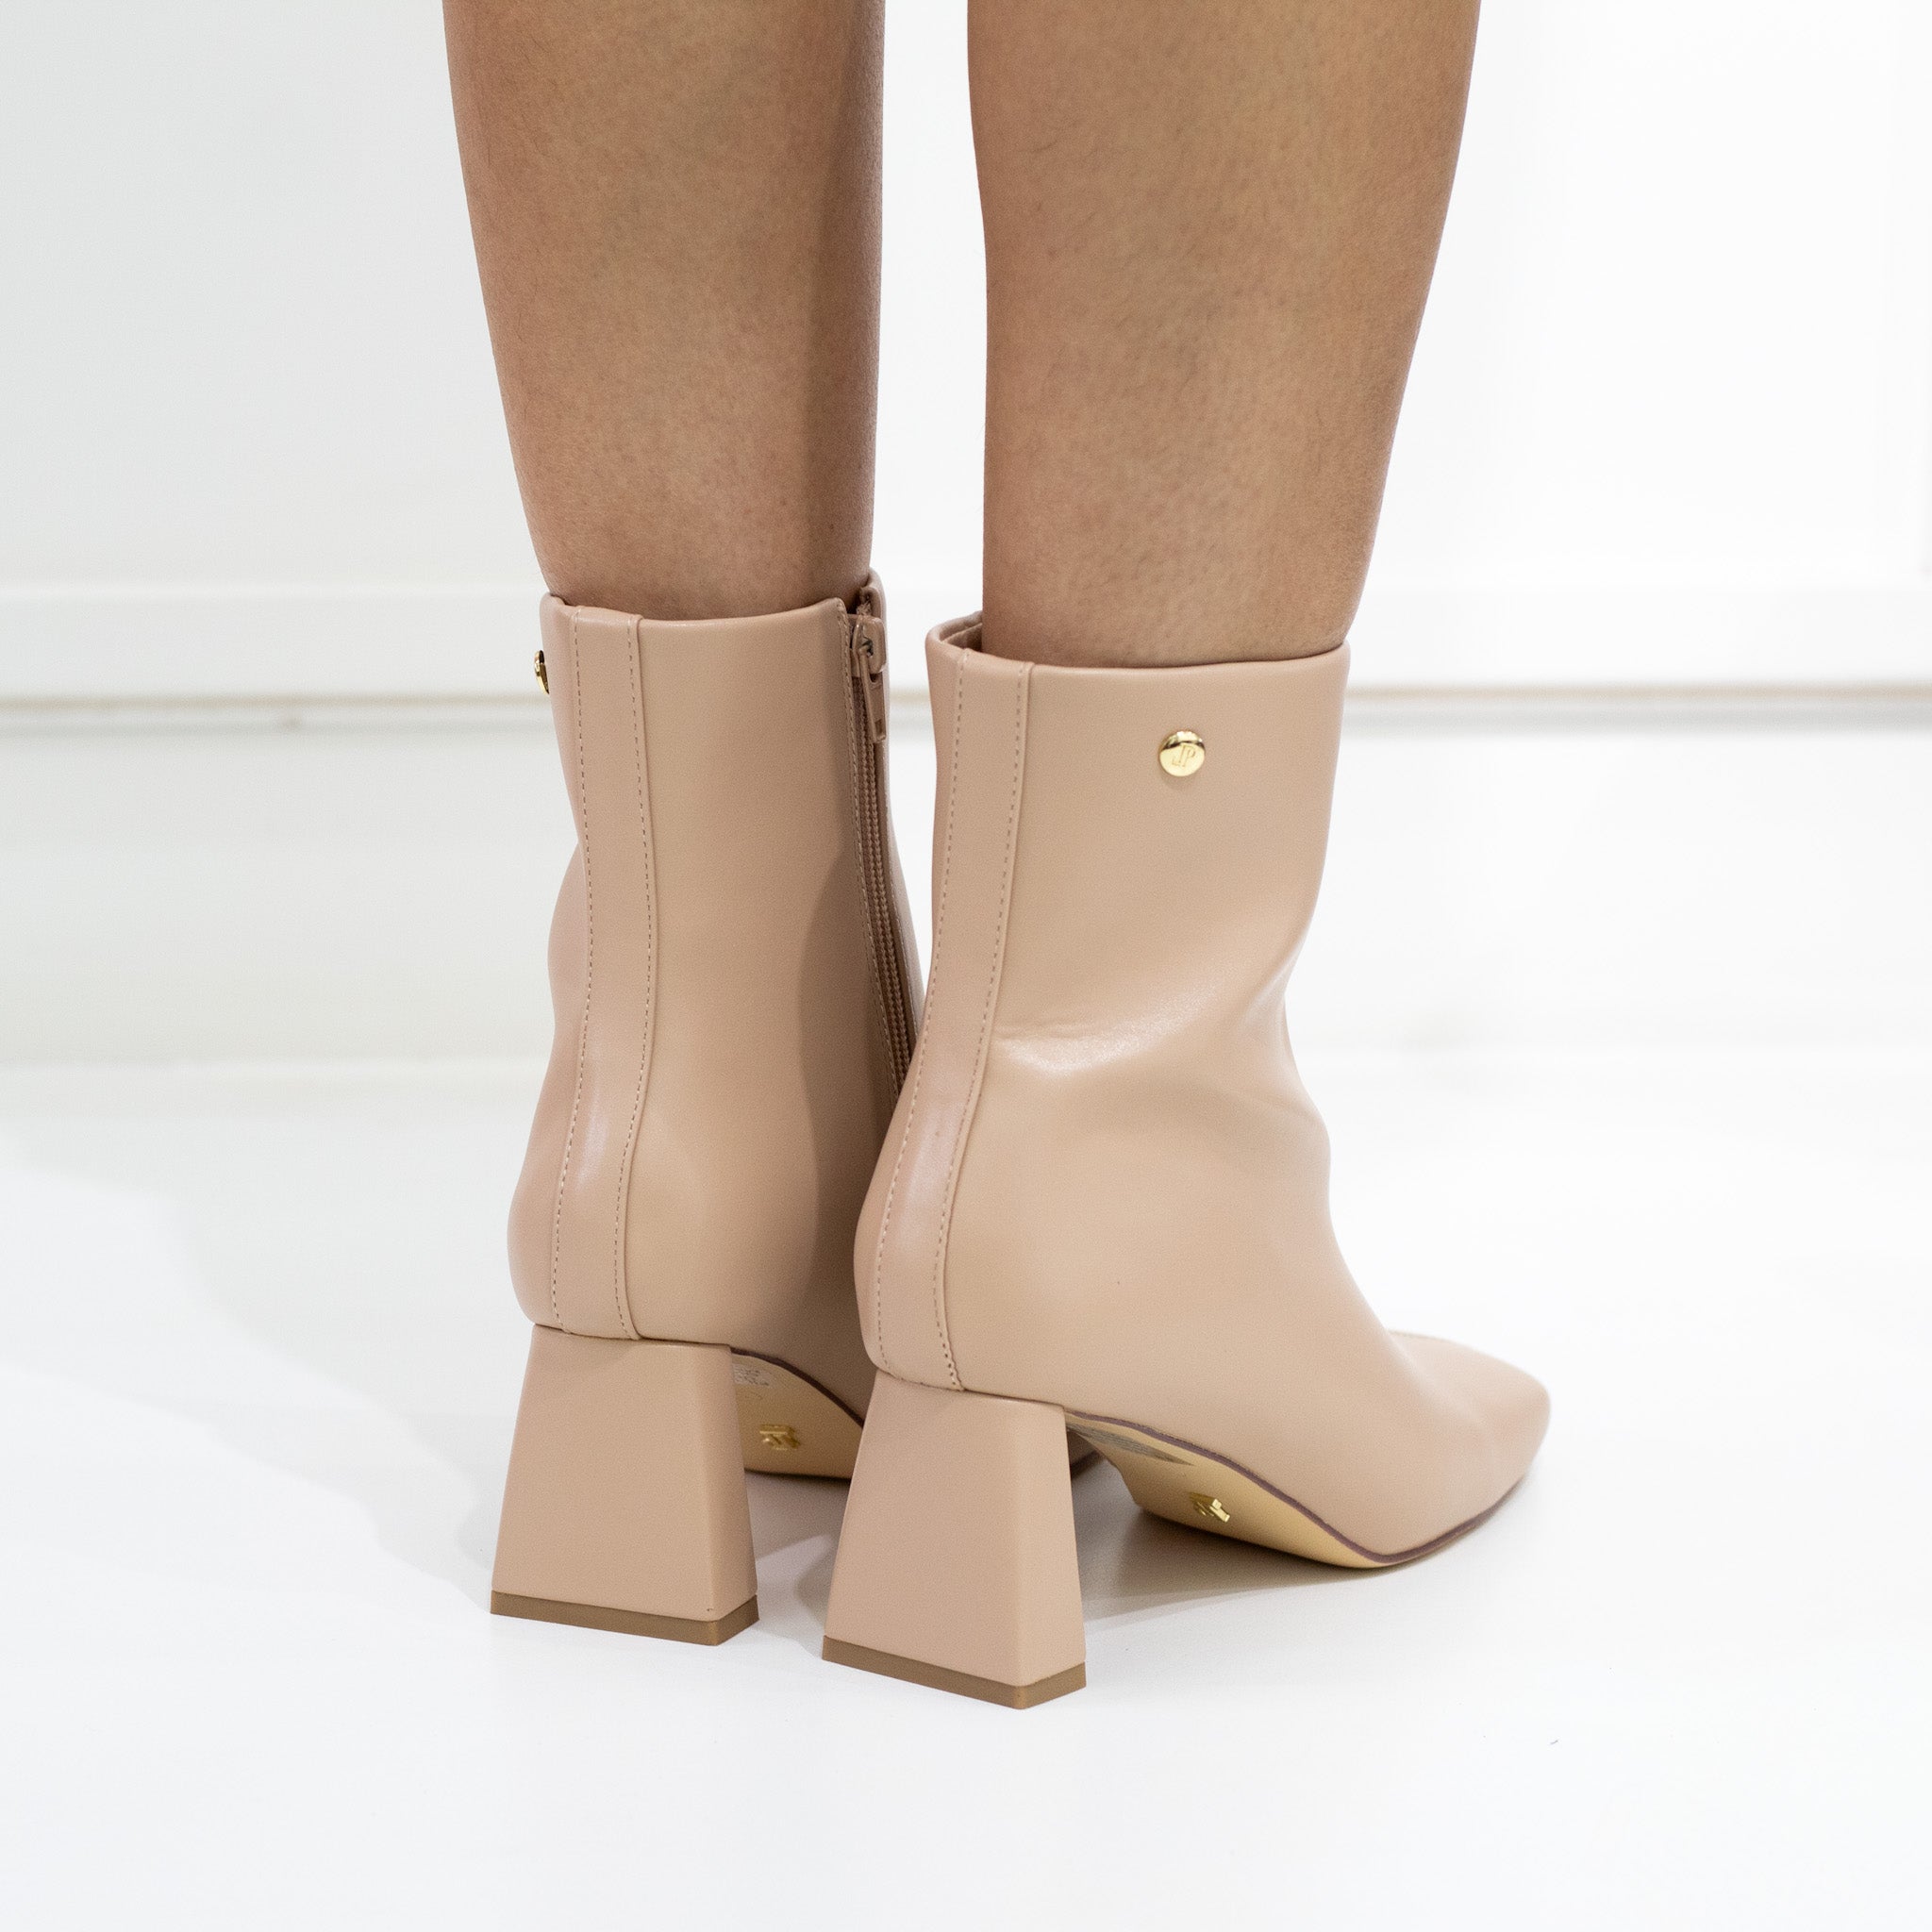 Nude 6.5cm heel square toe croc ankle boot filter